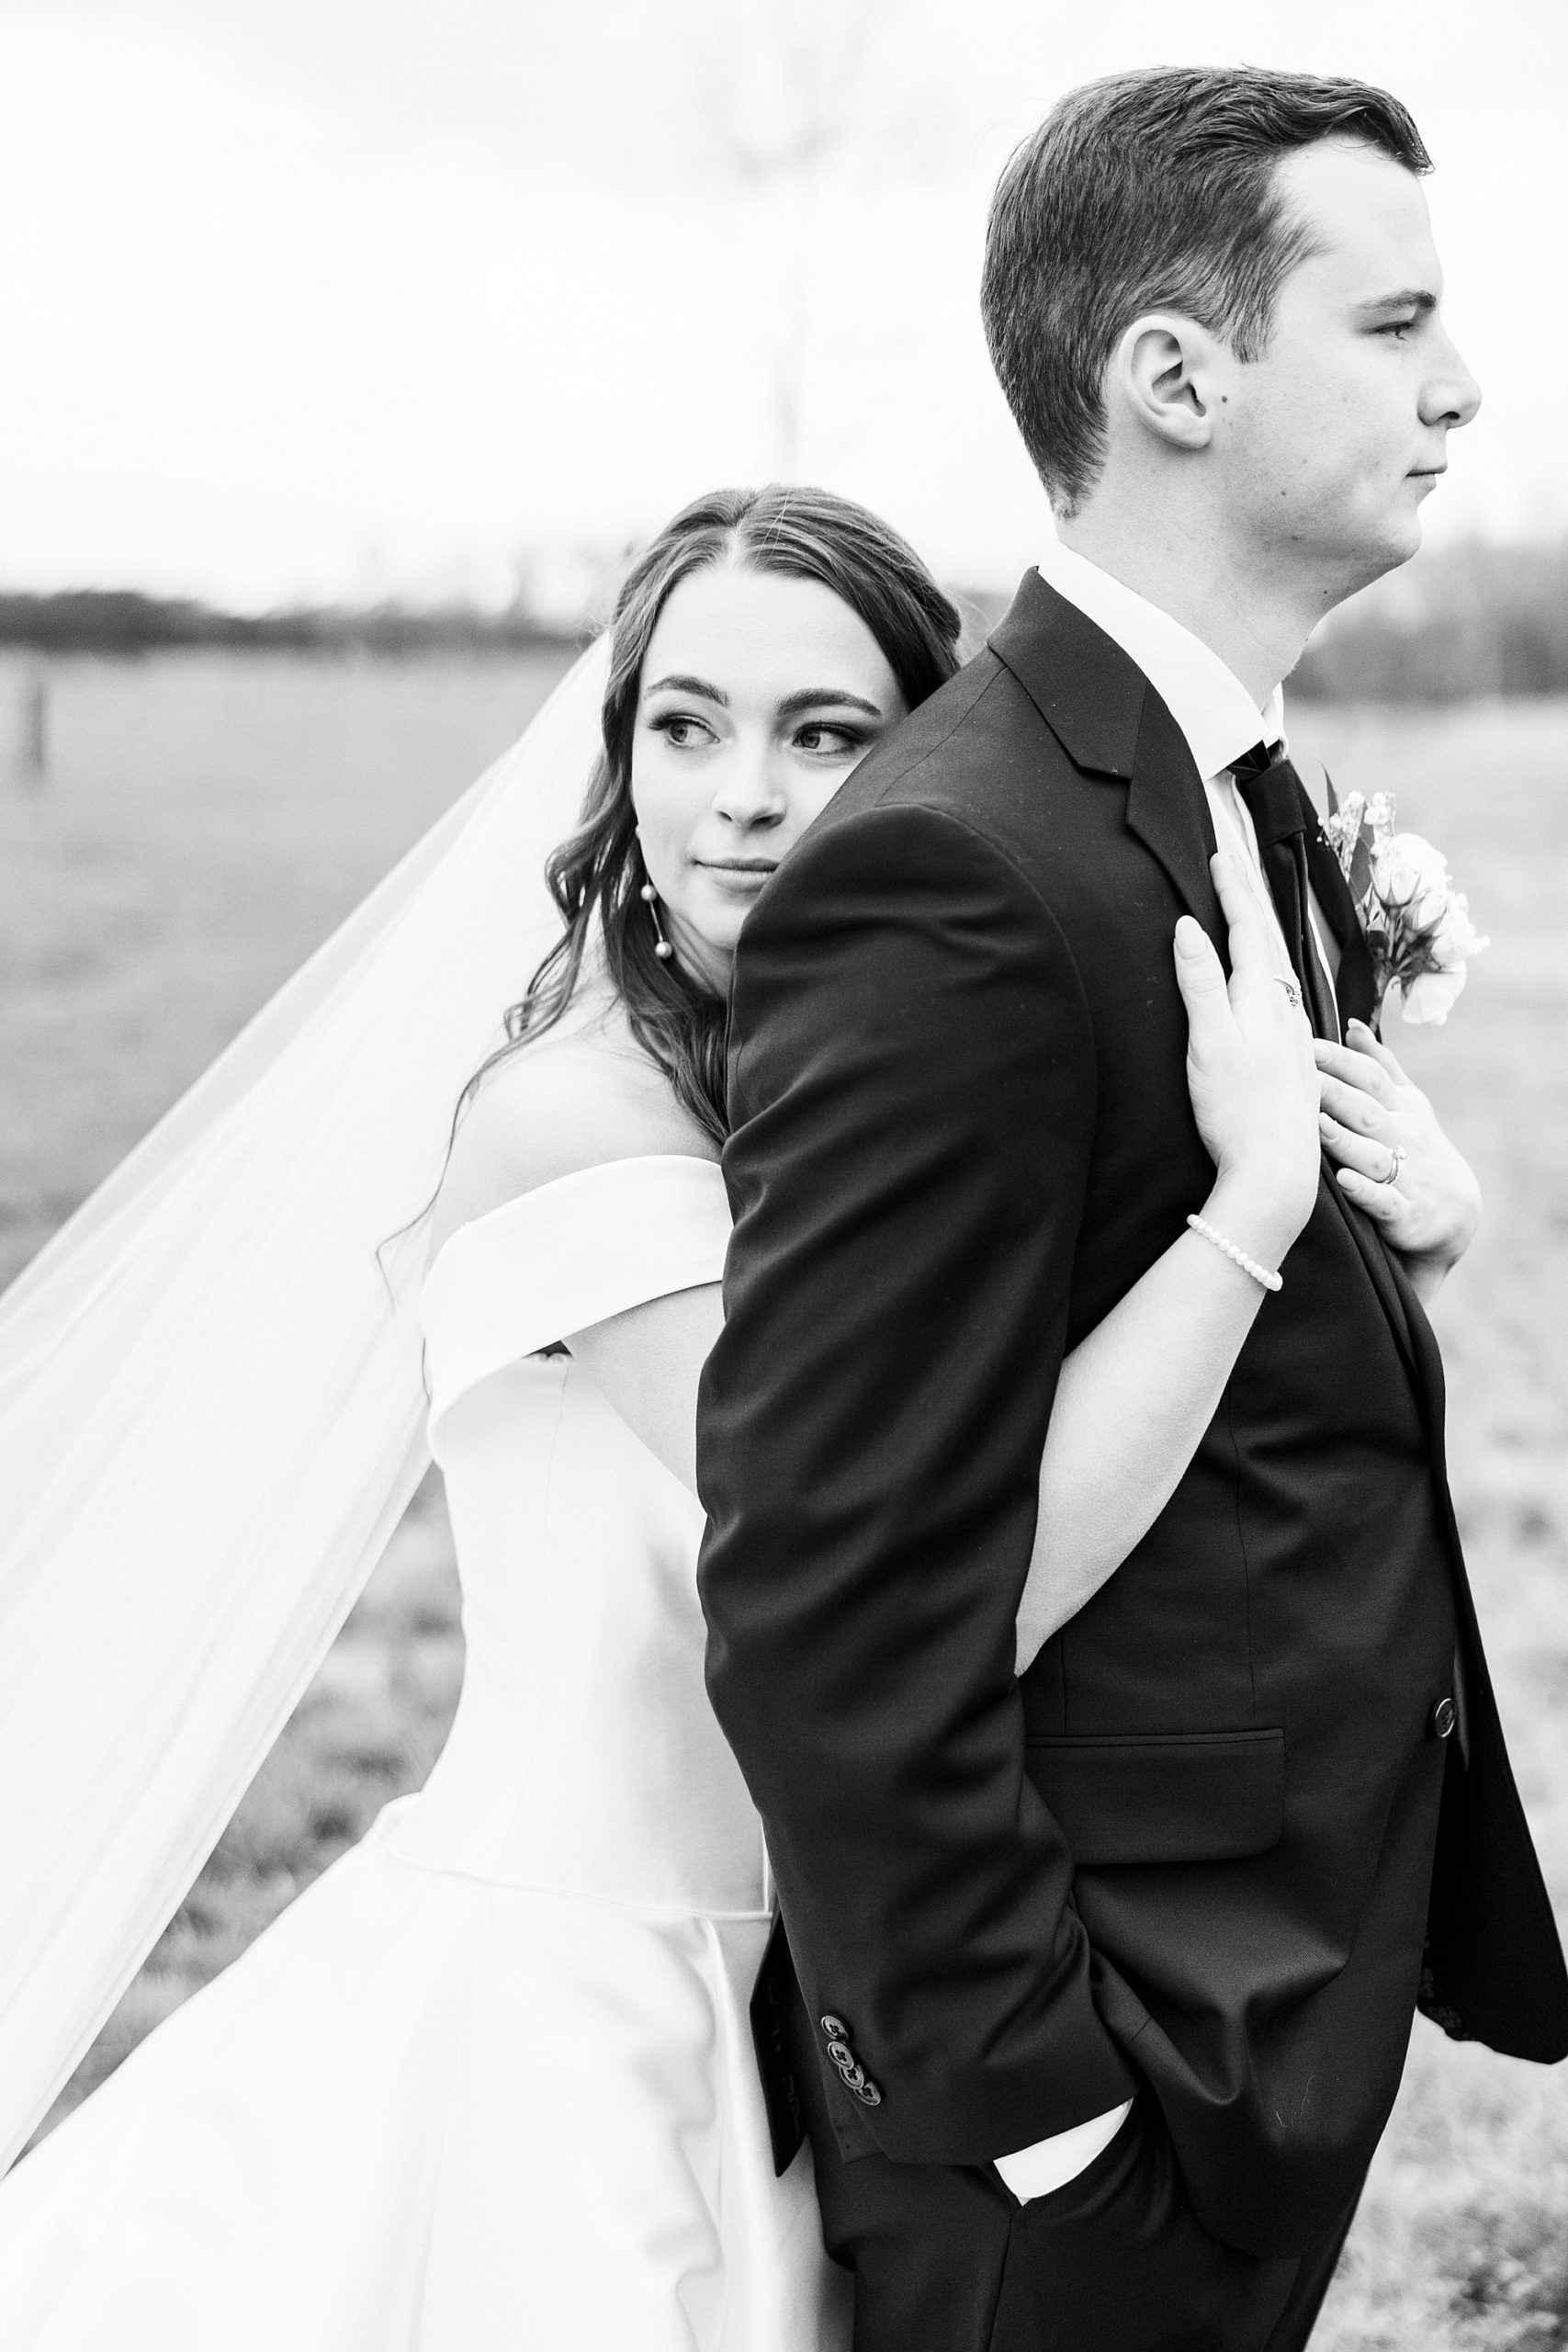 bride leans on groom's back during portraits for winter wedding day